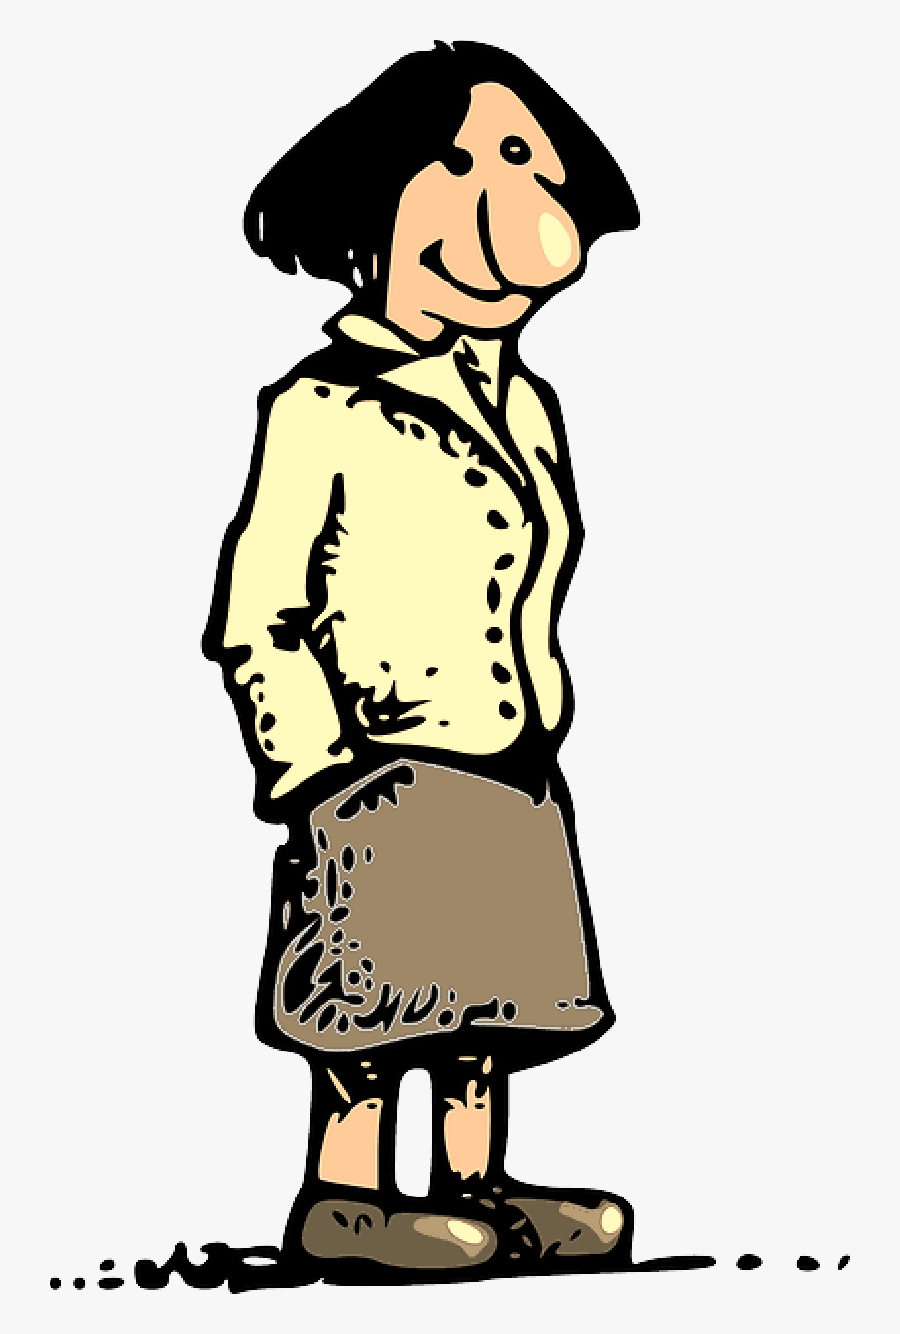 Old, People, Happy, Man, Lady, Female, Woman, Girl - Persona De Dibujo Png, Transparent Clipart